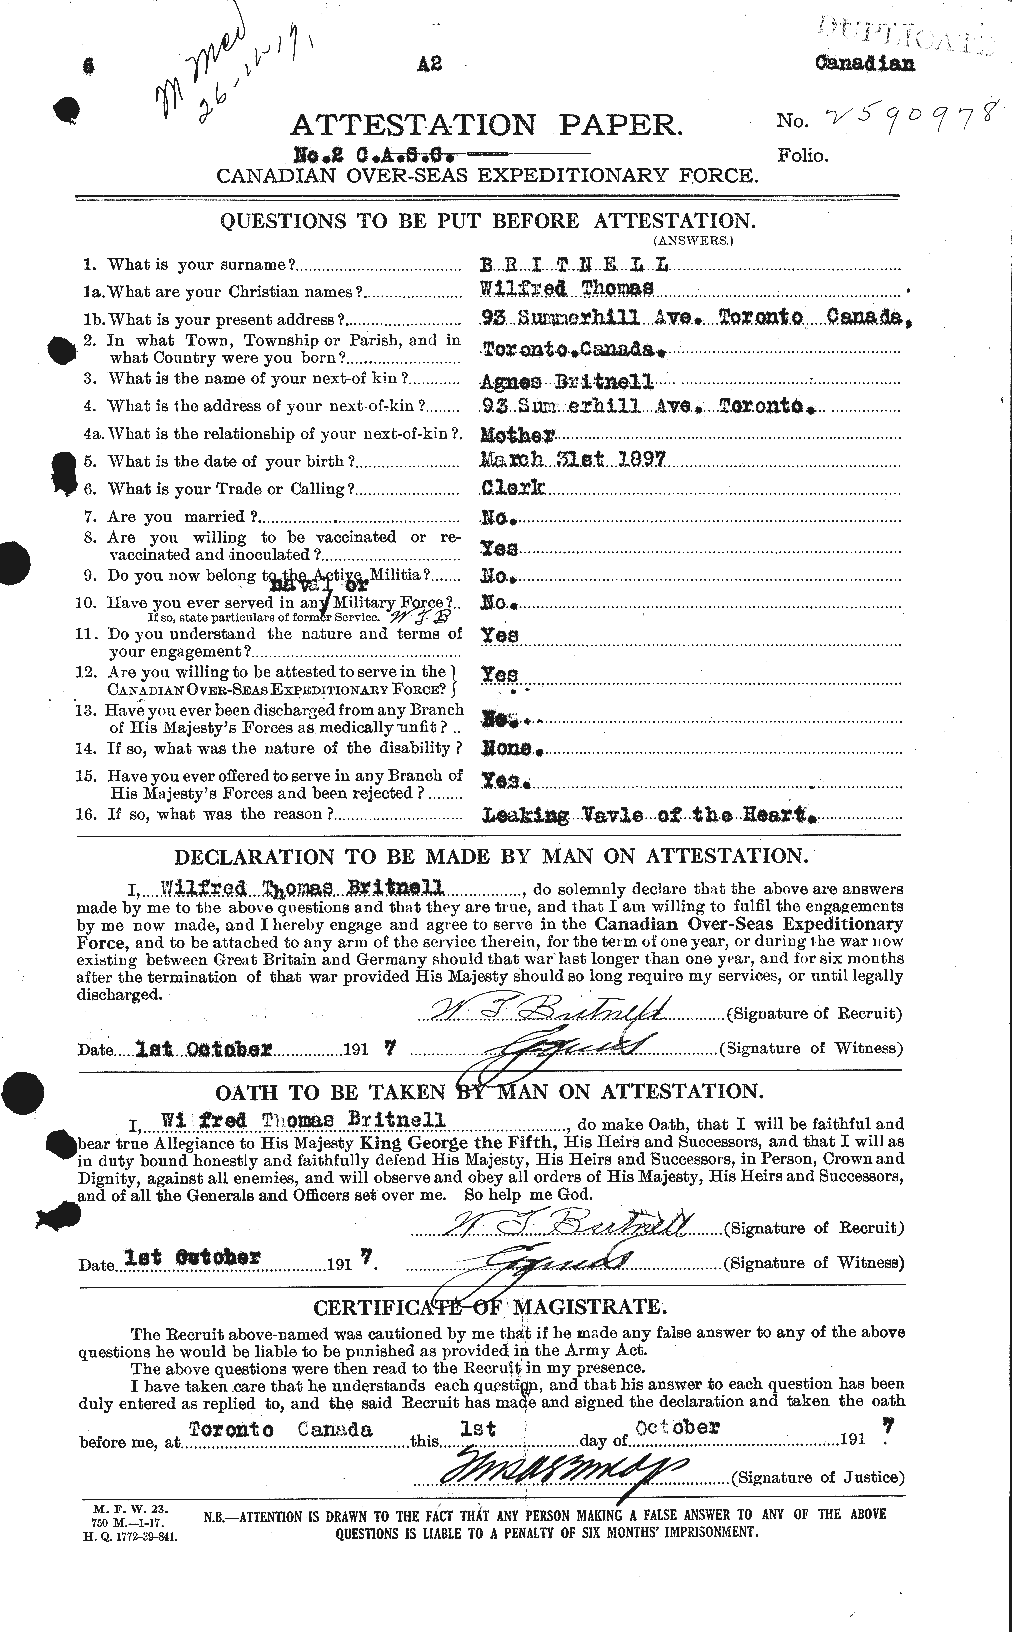 Personnel Records of the First World War - CEF 261812a